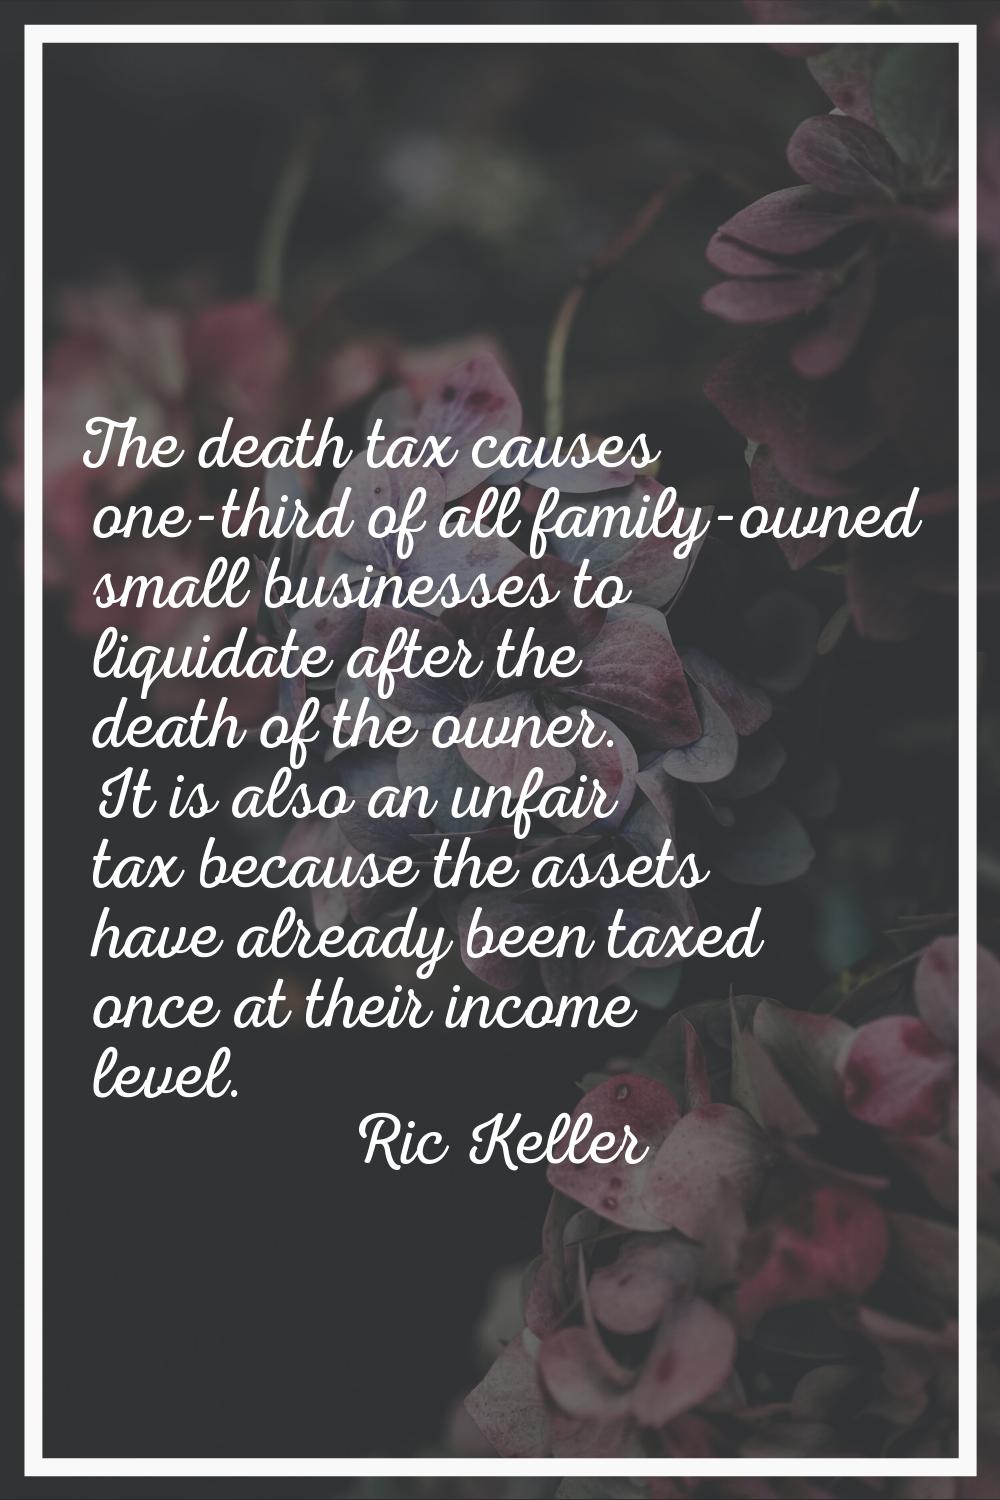 The death tax causes one-third of all family-owned small businesses to liquidate after the death of